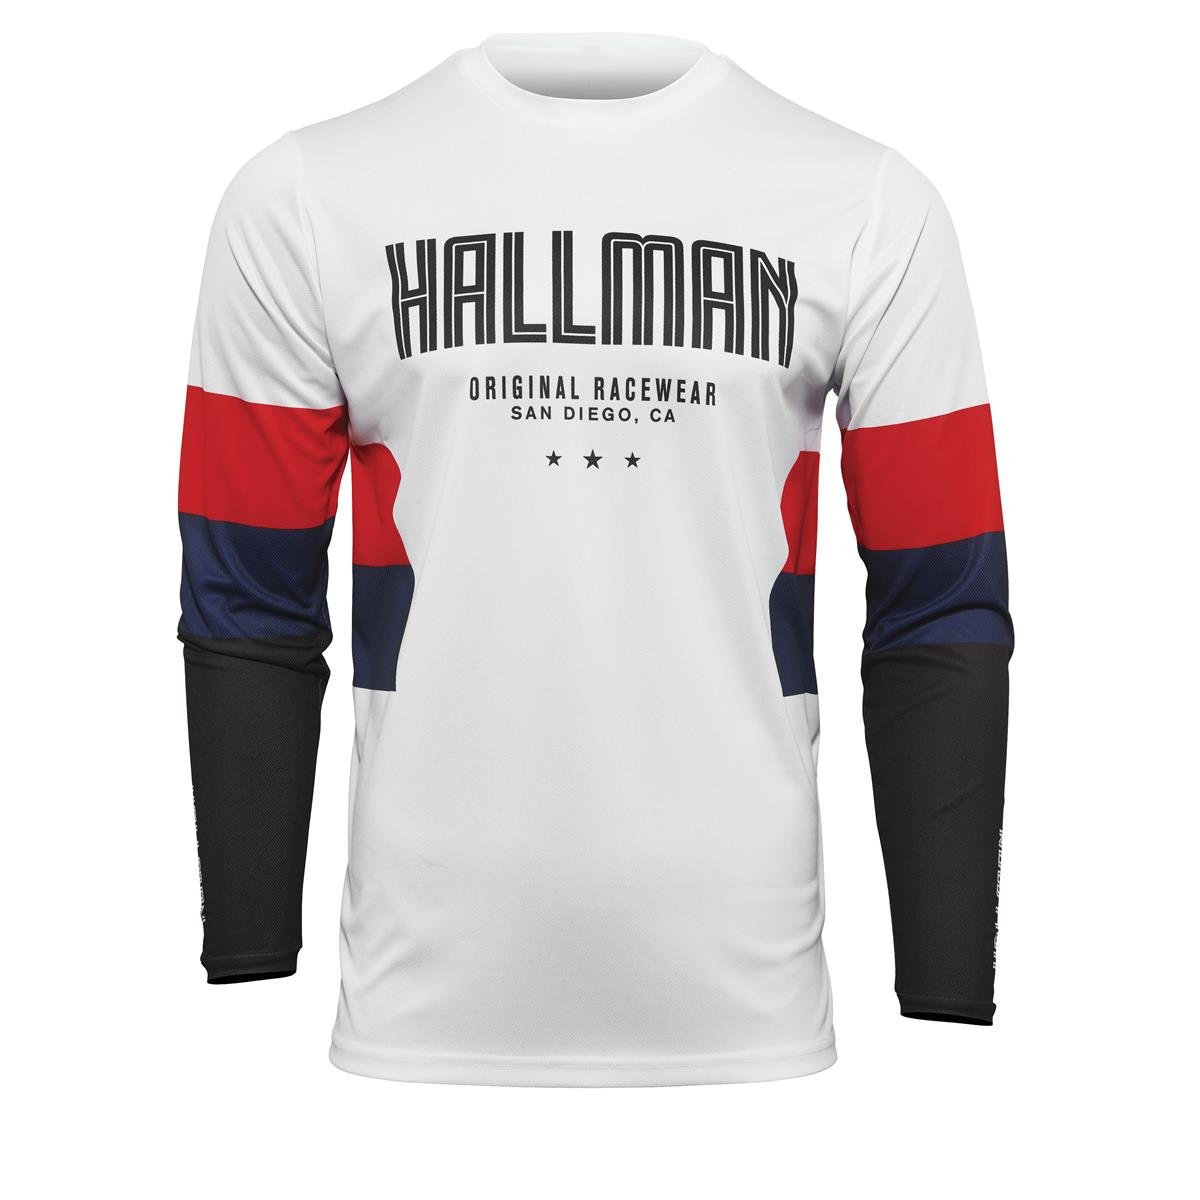 Thor MX Jersey Differ Draft - White/Red/Navy